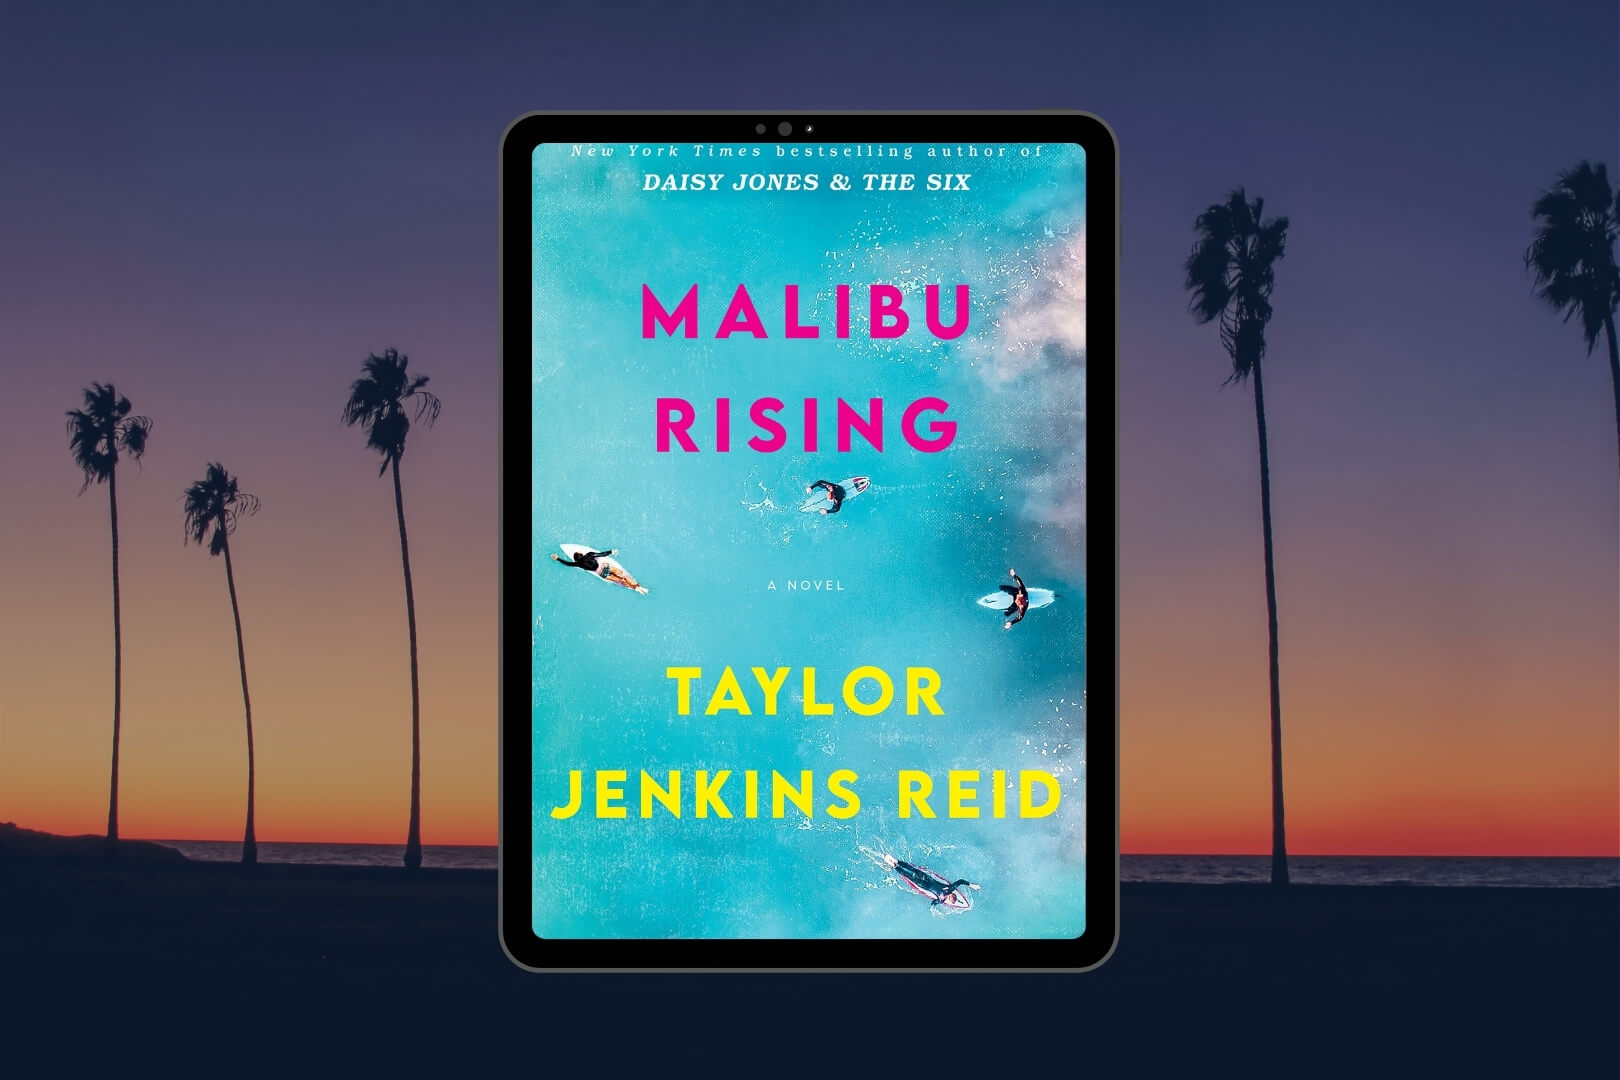 Book Club Questions for Malibu Rising by Taylor Jenkins Reid